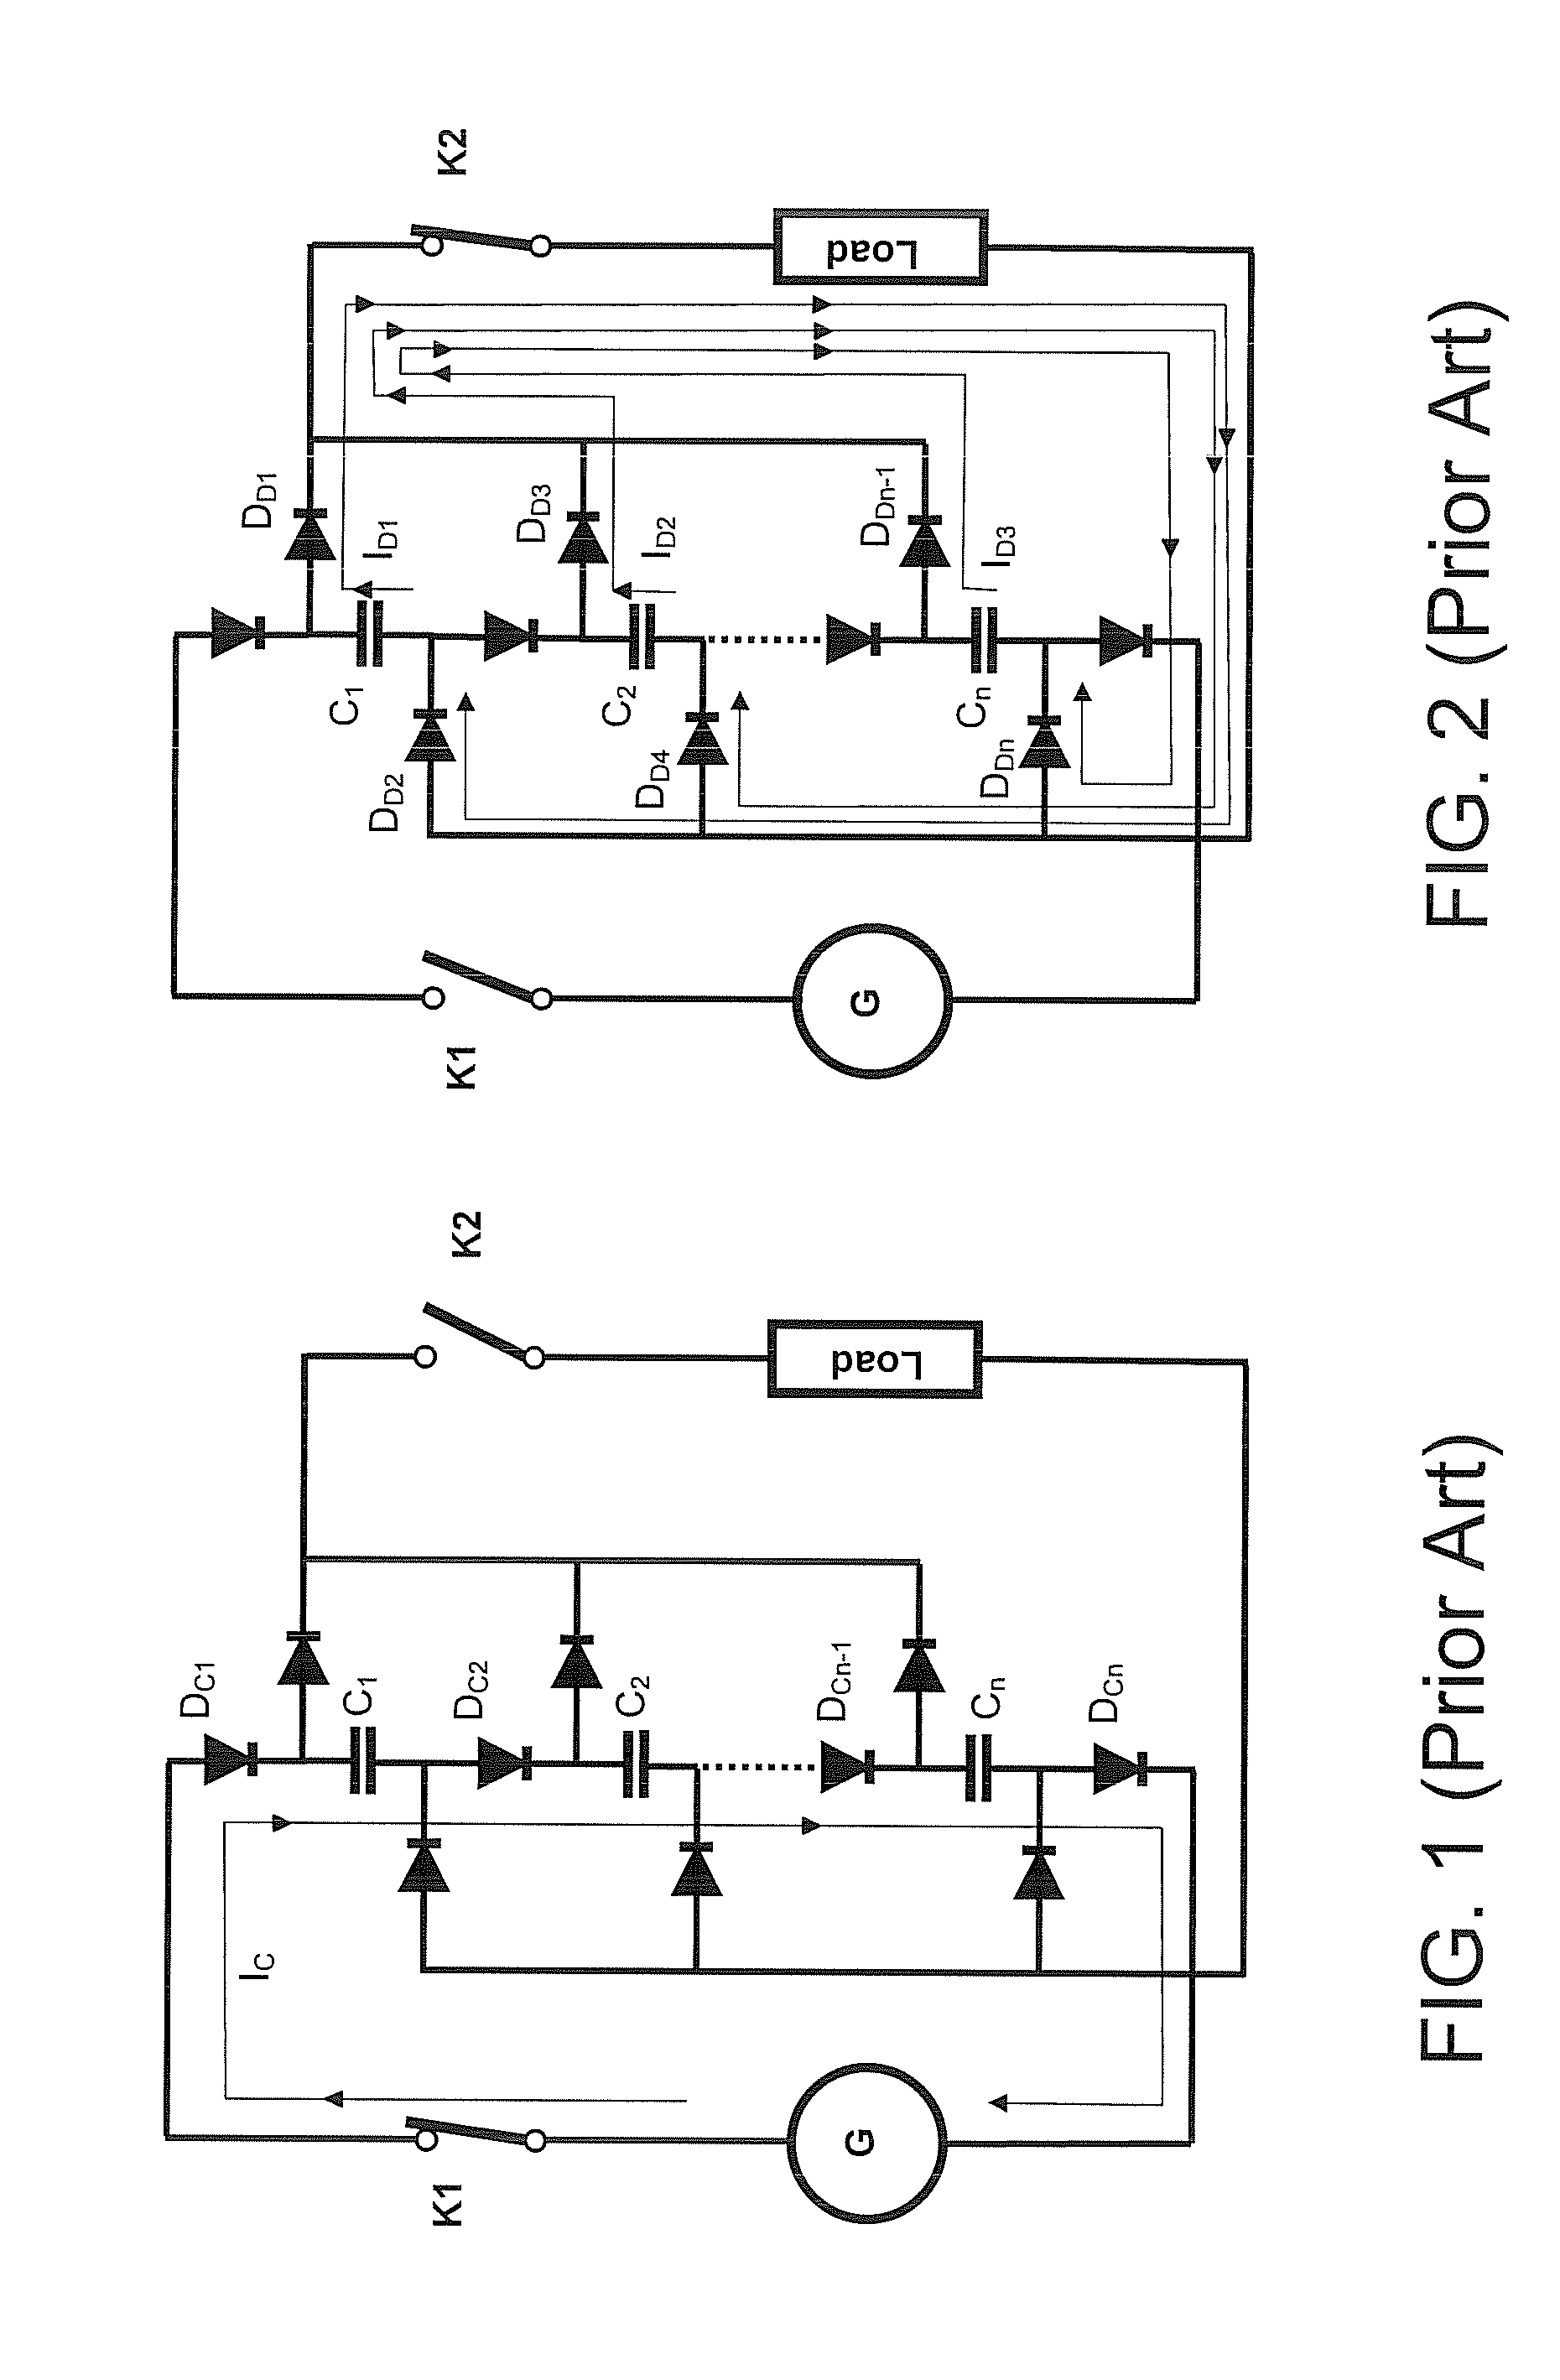 Single switch high efficiency power supply